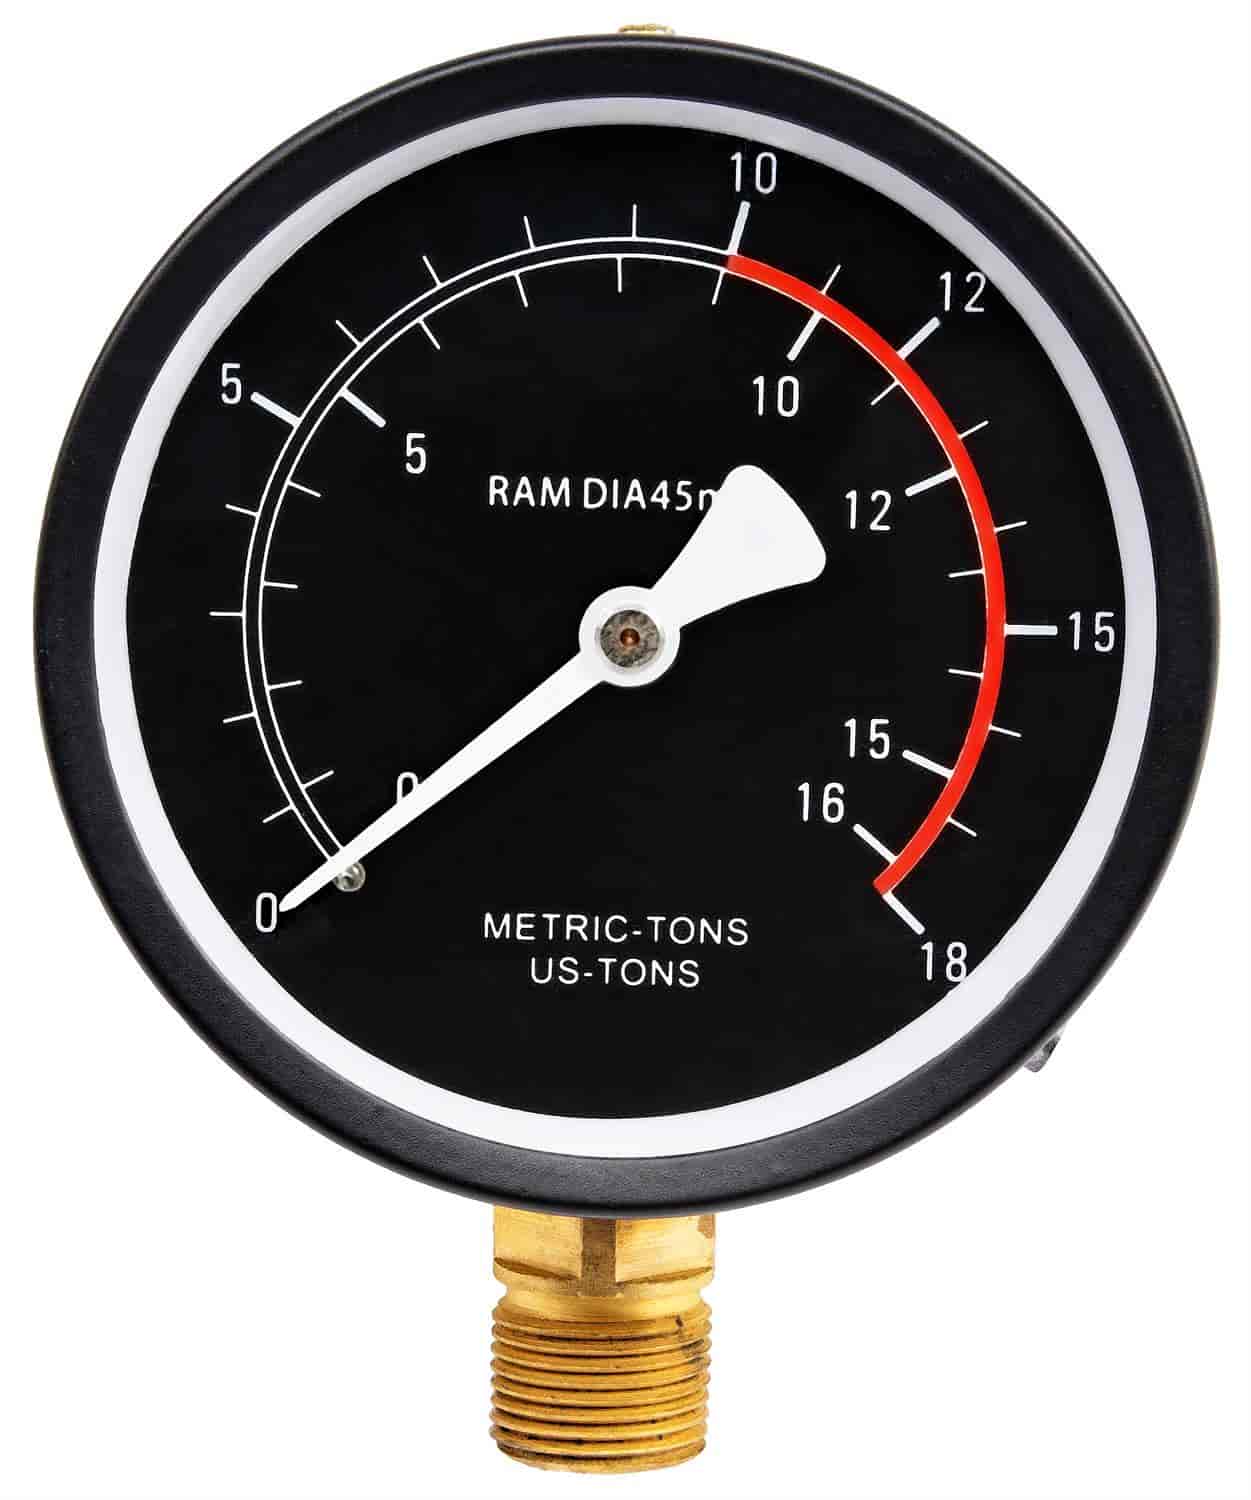 Replacement Pressure Gauge For 10-Ton Hydraulic Shop Press